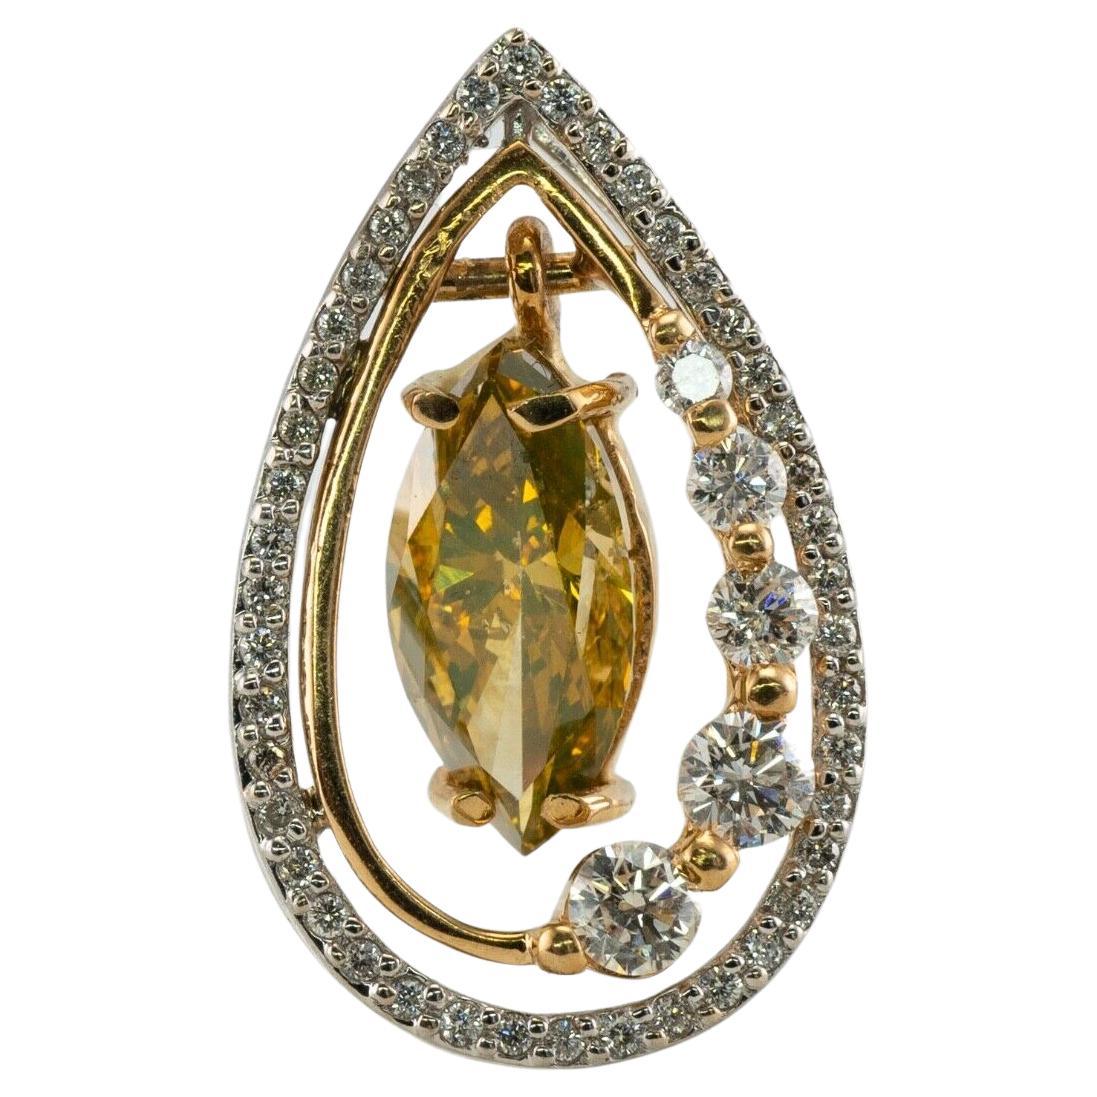 Champagne Marquise Diamond Pendant Slide 14K Gold 2.84 cts tdw For Sale